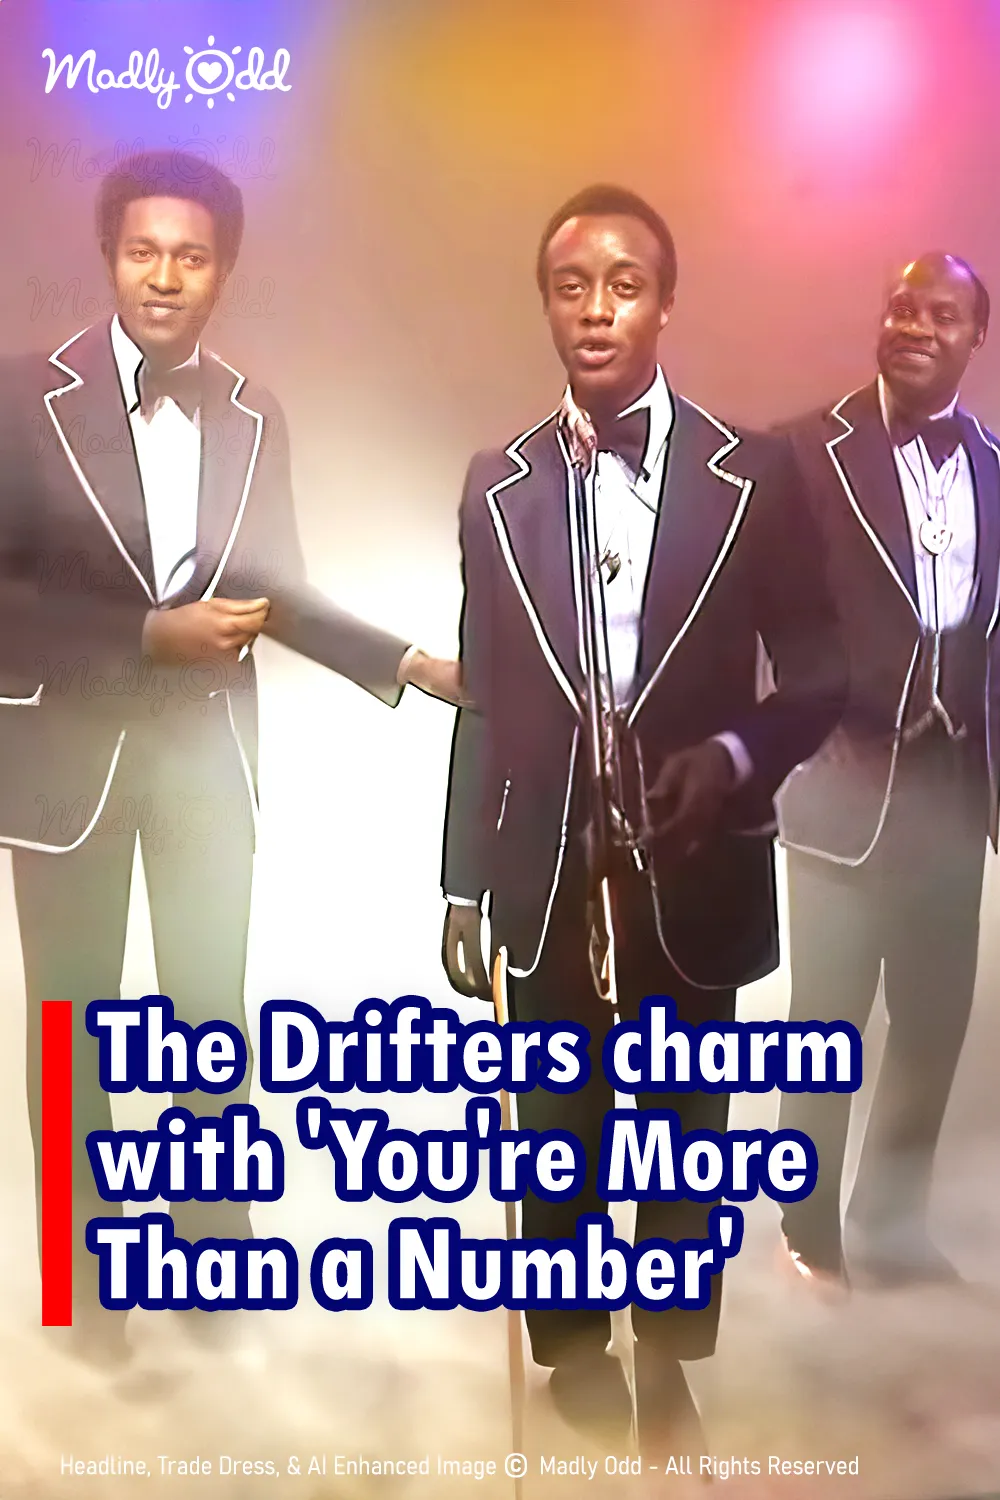 The Drifters \'You\'re More Than a Number\' tops charts again